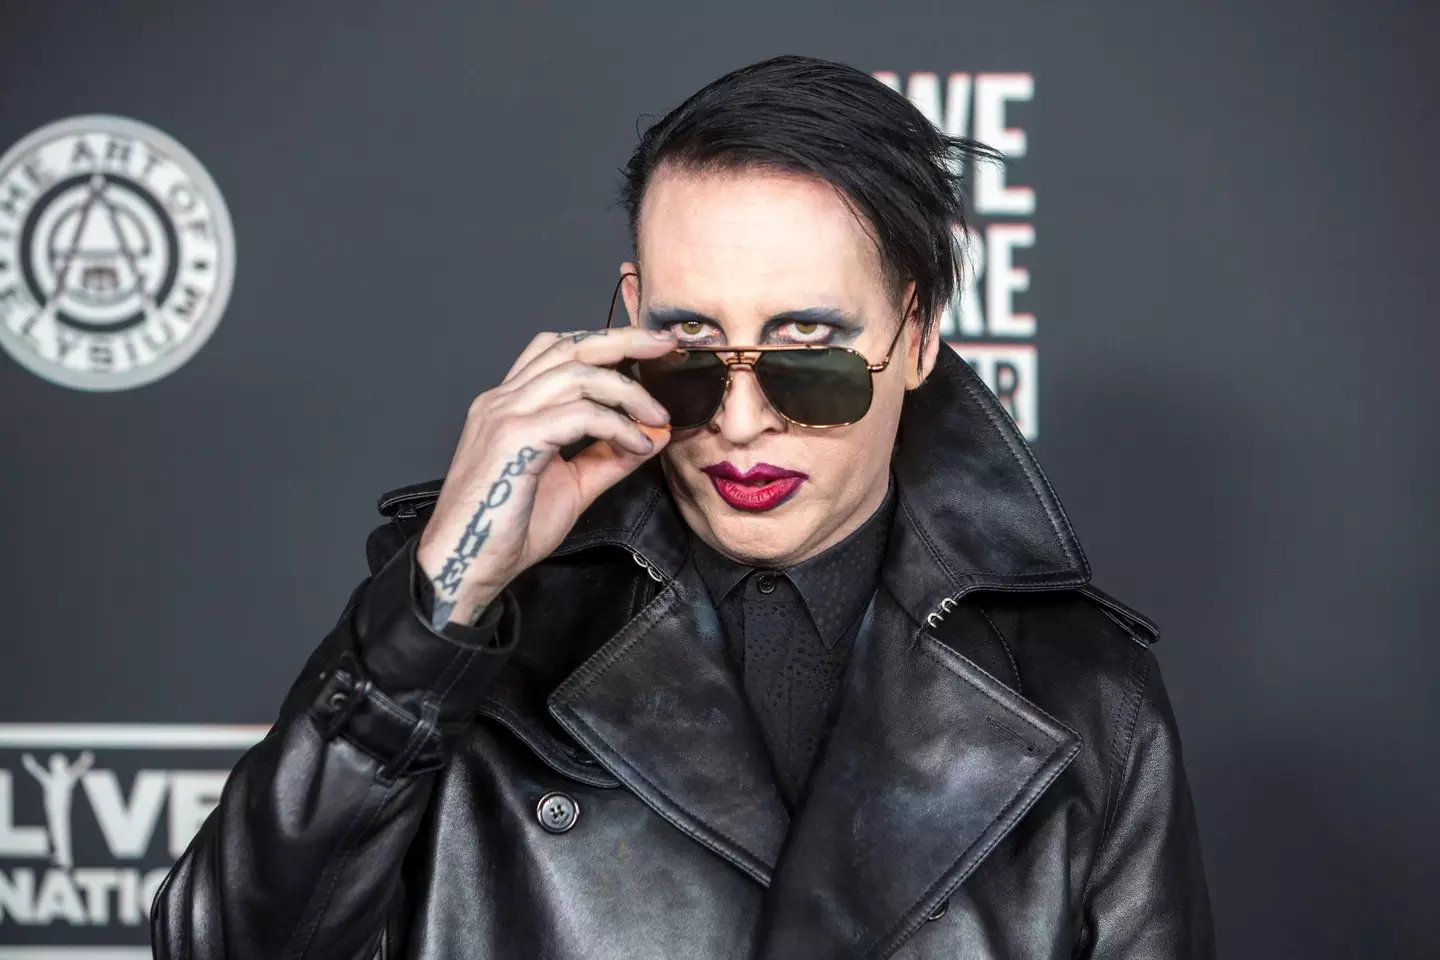 Marilyn Manson's attorney has described the allegations as 'provably fales'.